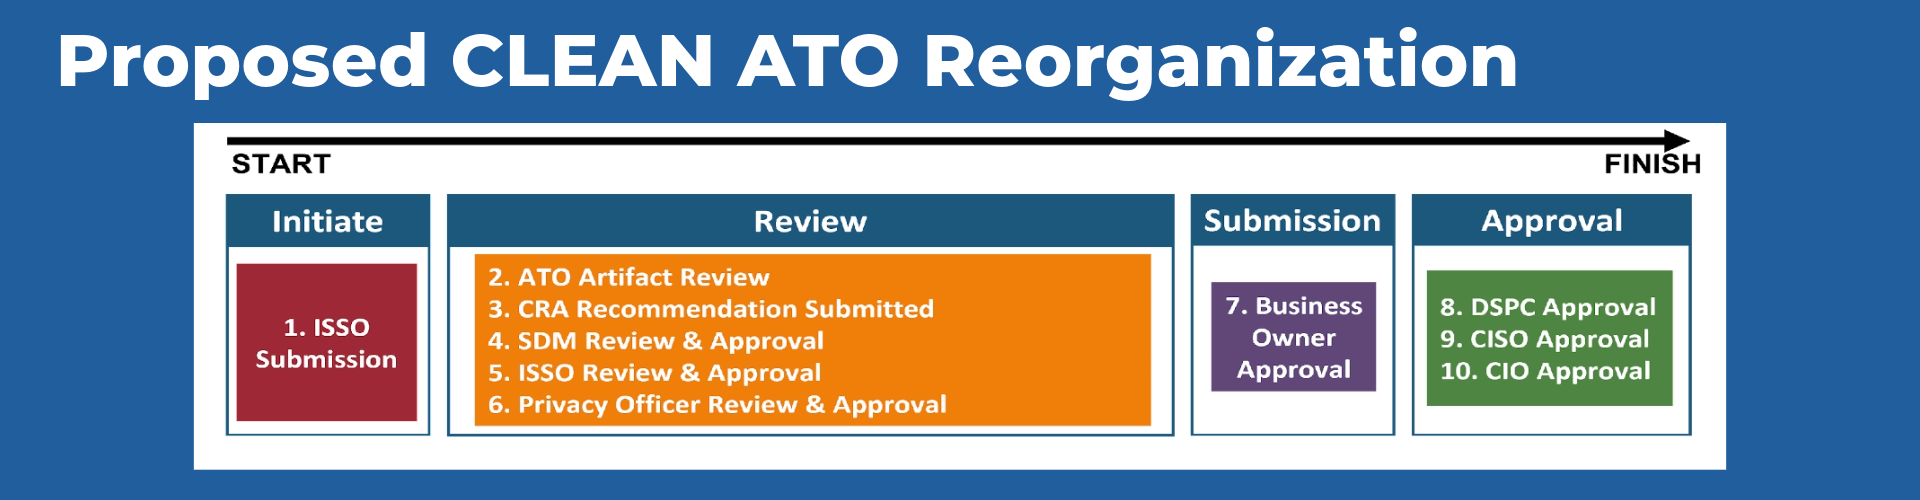 Graphic of proposed CLEAN ATO Reorganization. From left to right: 1) Initiate (ISSO Submission) 2) Review (ATO Artifact Review, CRA Recommendation Submitted, SDM Review and Approval, ISSO Review & Approval, Privacy Officer Review & Approval 3) Submission (Business Owner Approval) 4)Approval (DSPC Approval, CISO Approval, CIO Approval).